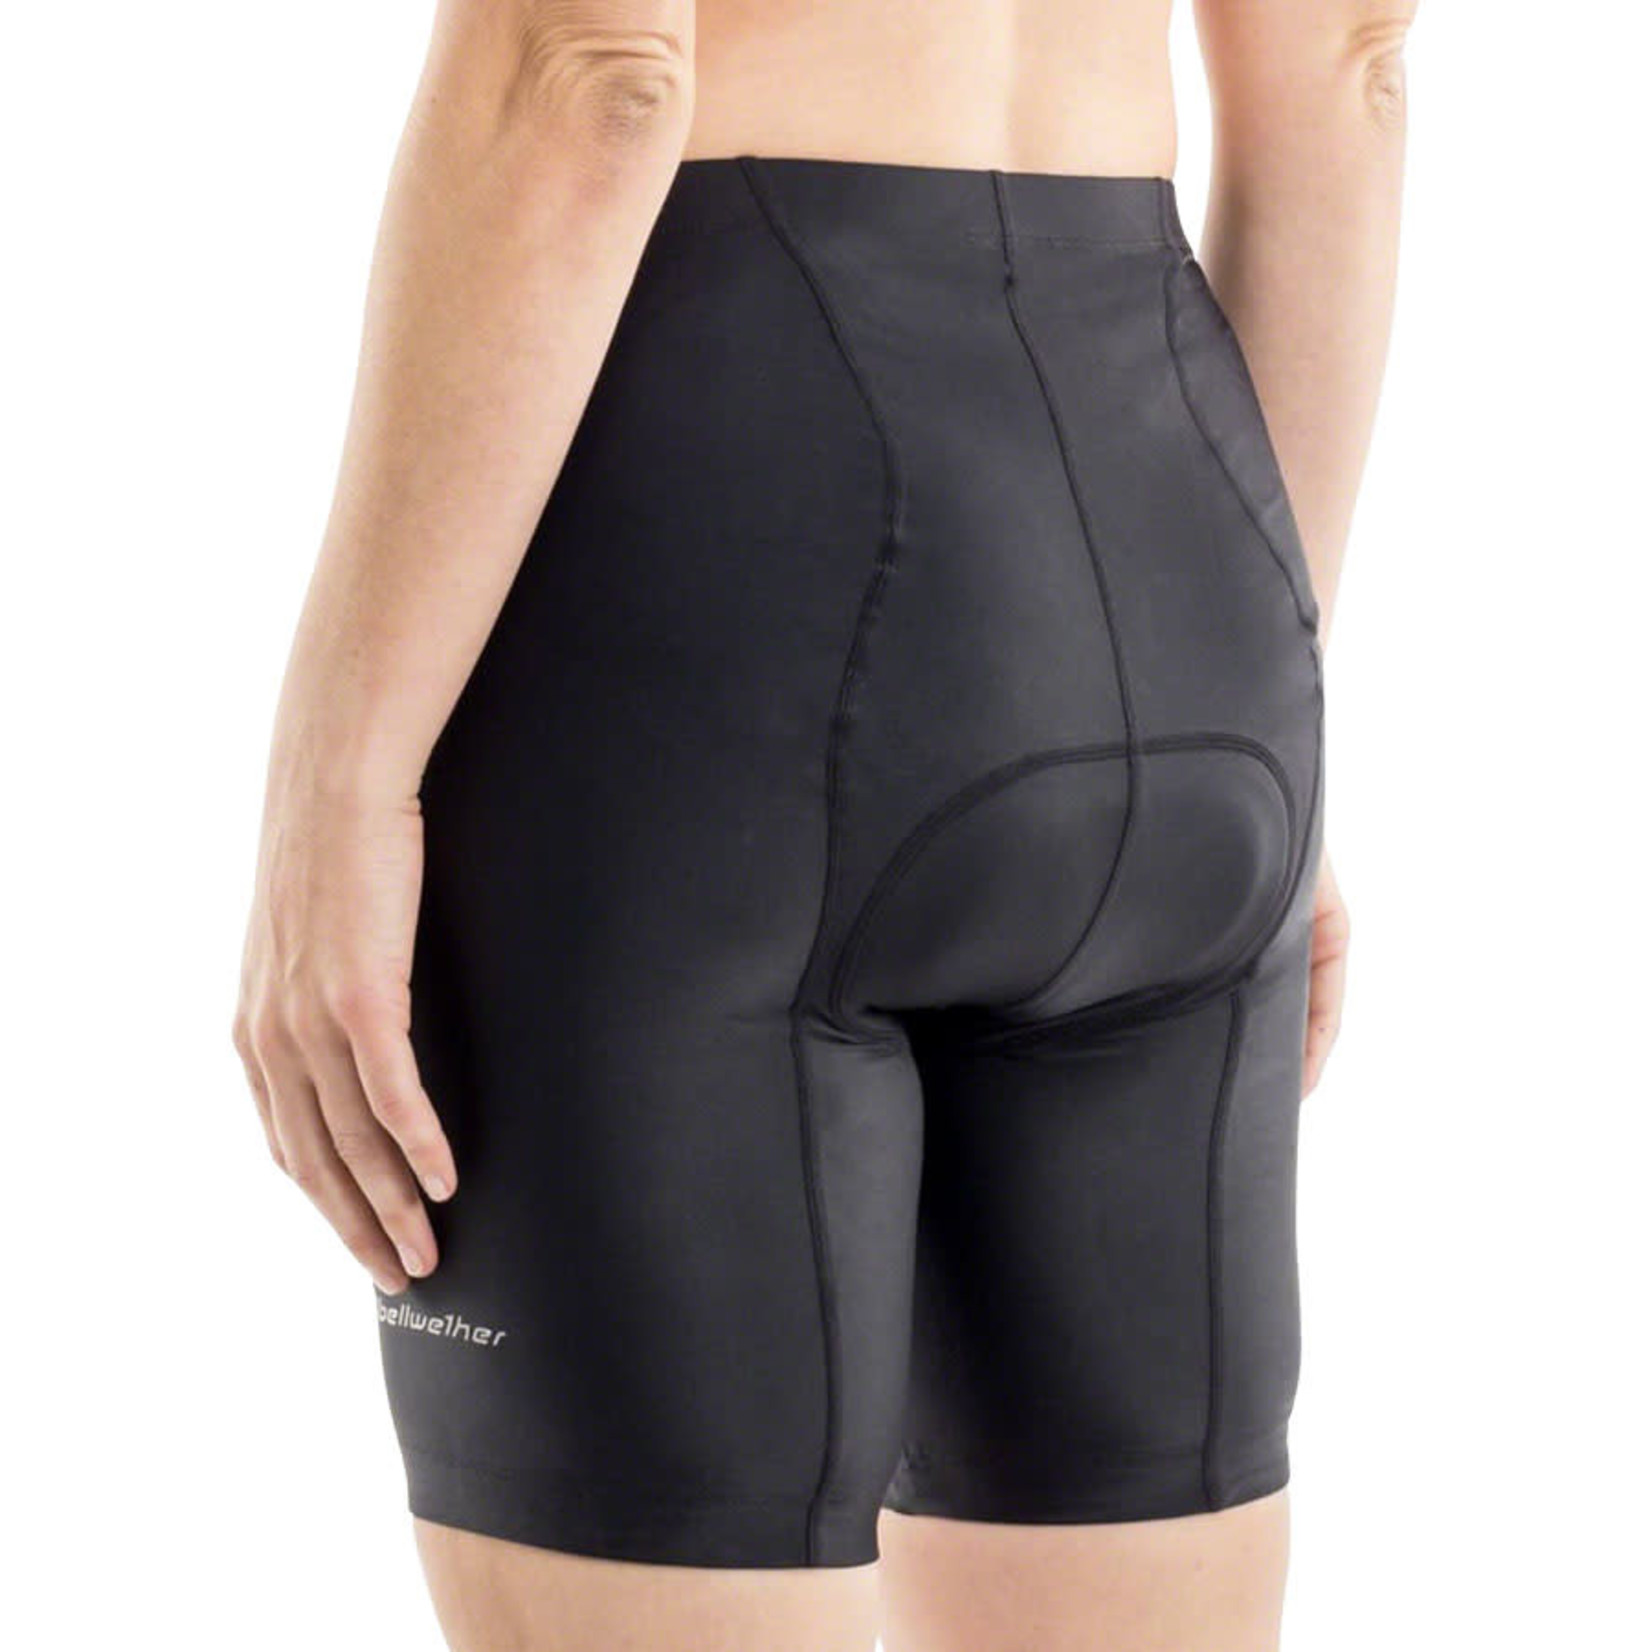 Bellwether Bellwether O2 Shorts - Black, Small, Women's